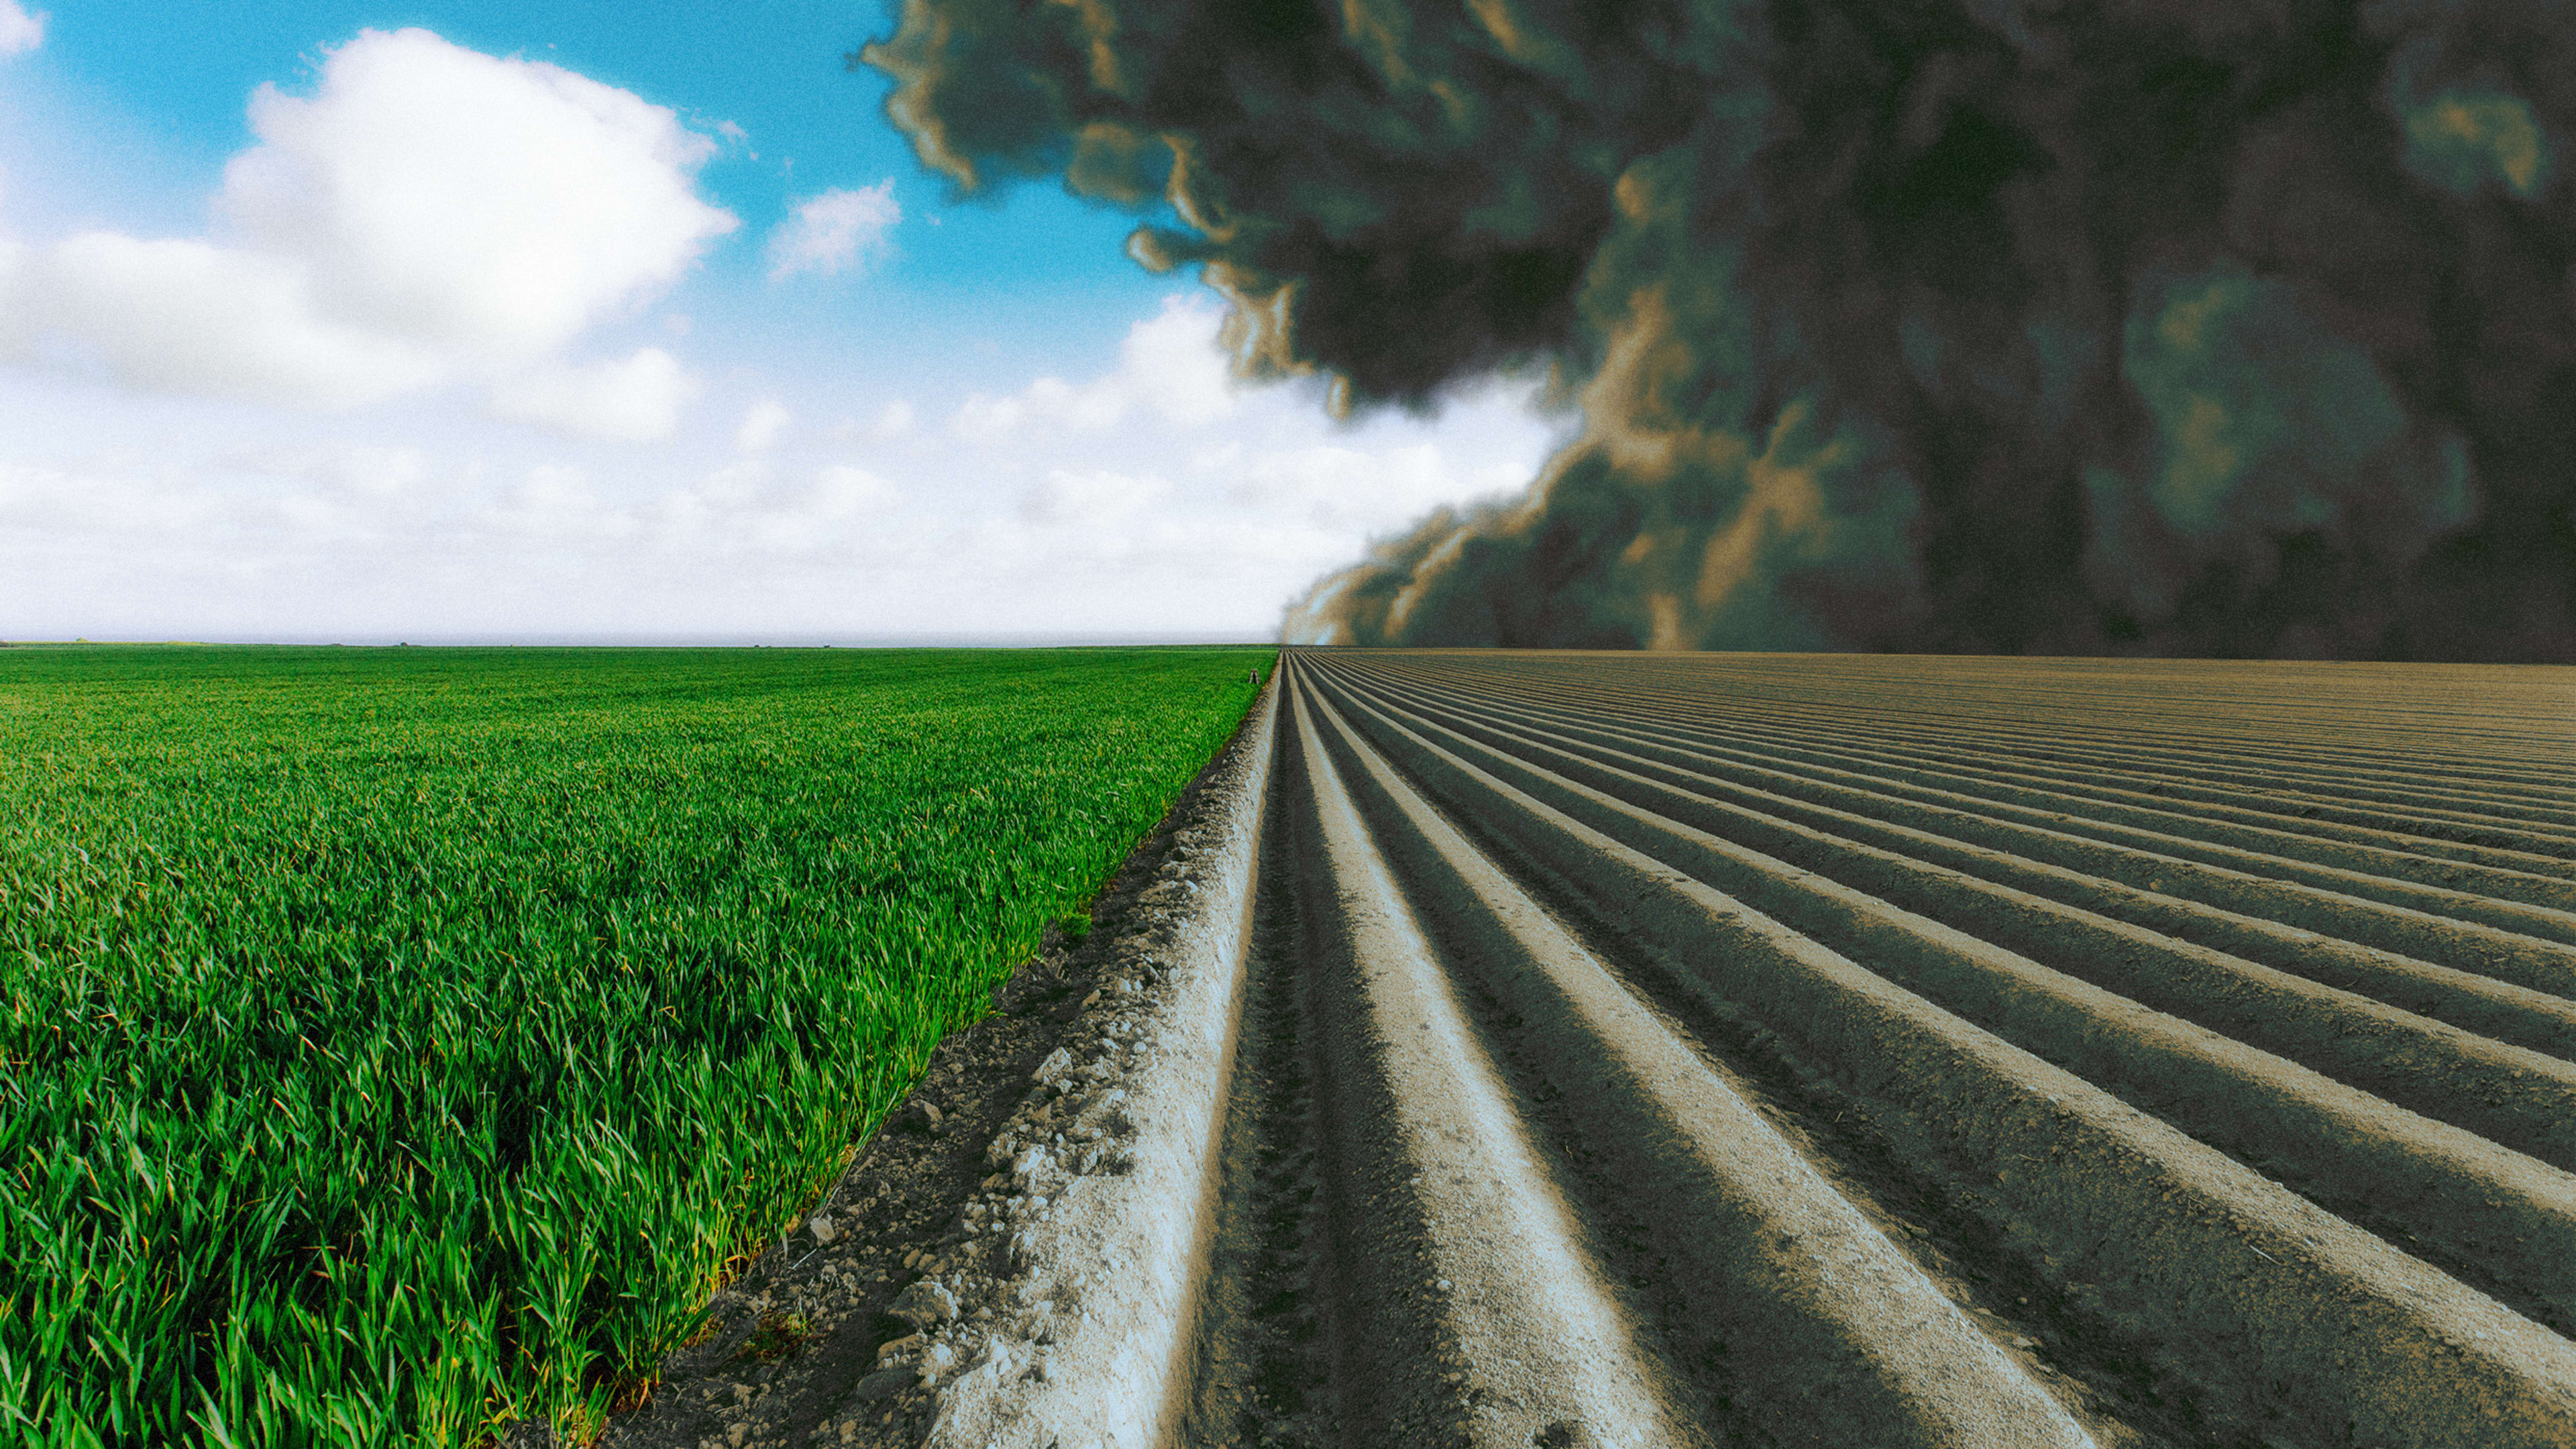 Warming is going to push farming North, releasing huge swaths of carbon stored in the soil